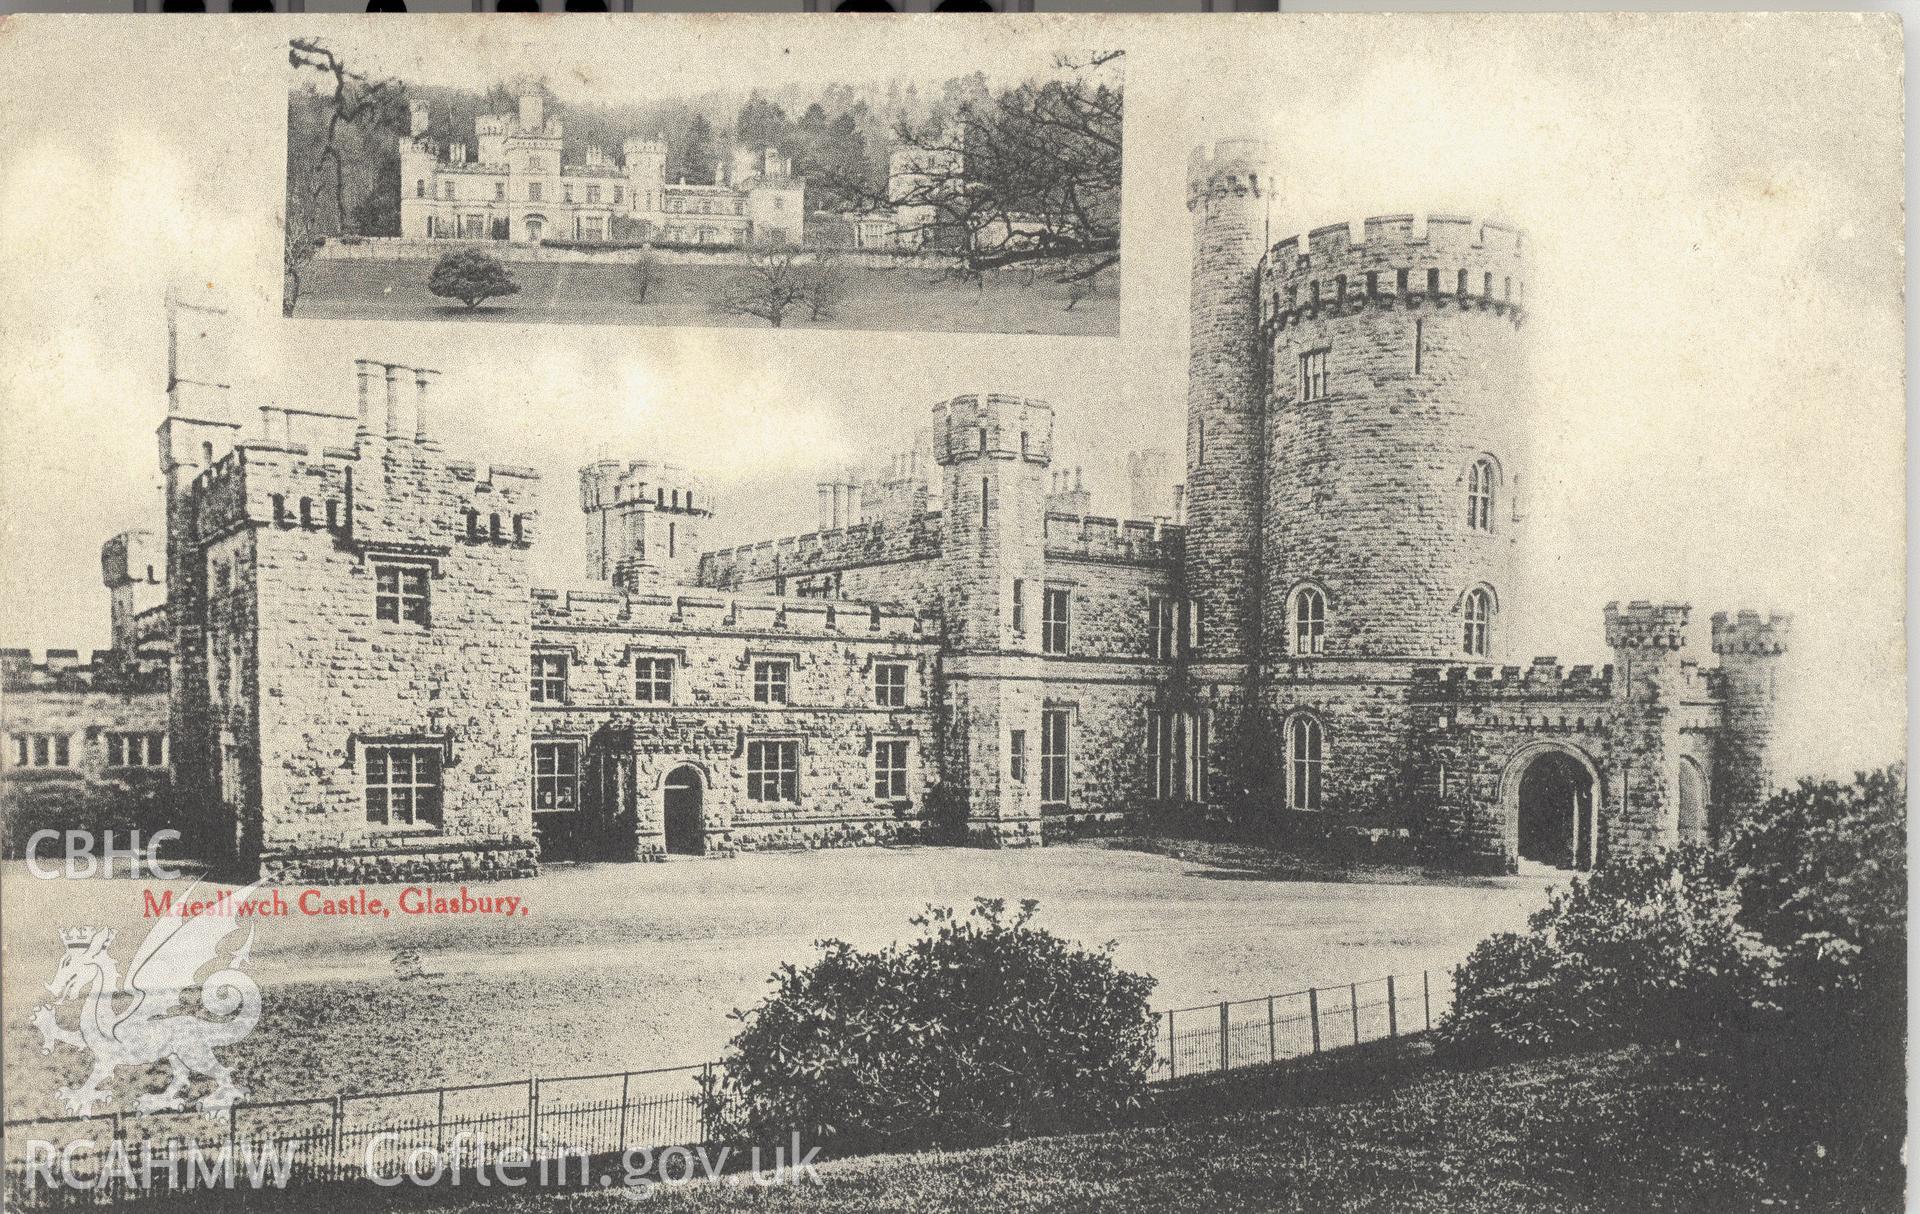 Digitised postcard image of Maesllwch Castle, Glasbury  (from N.E.), Cartwright, photographer, Talgarth. Produced by Parks and Gardens Data Services, from an original item in the Peter Davis Collection at Parks and Gardens UK. We hold only web-resolution images of this collection, suitable for viewing on screen and for research purposes only. We do not hold the original images, or publication quality scans.